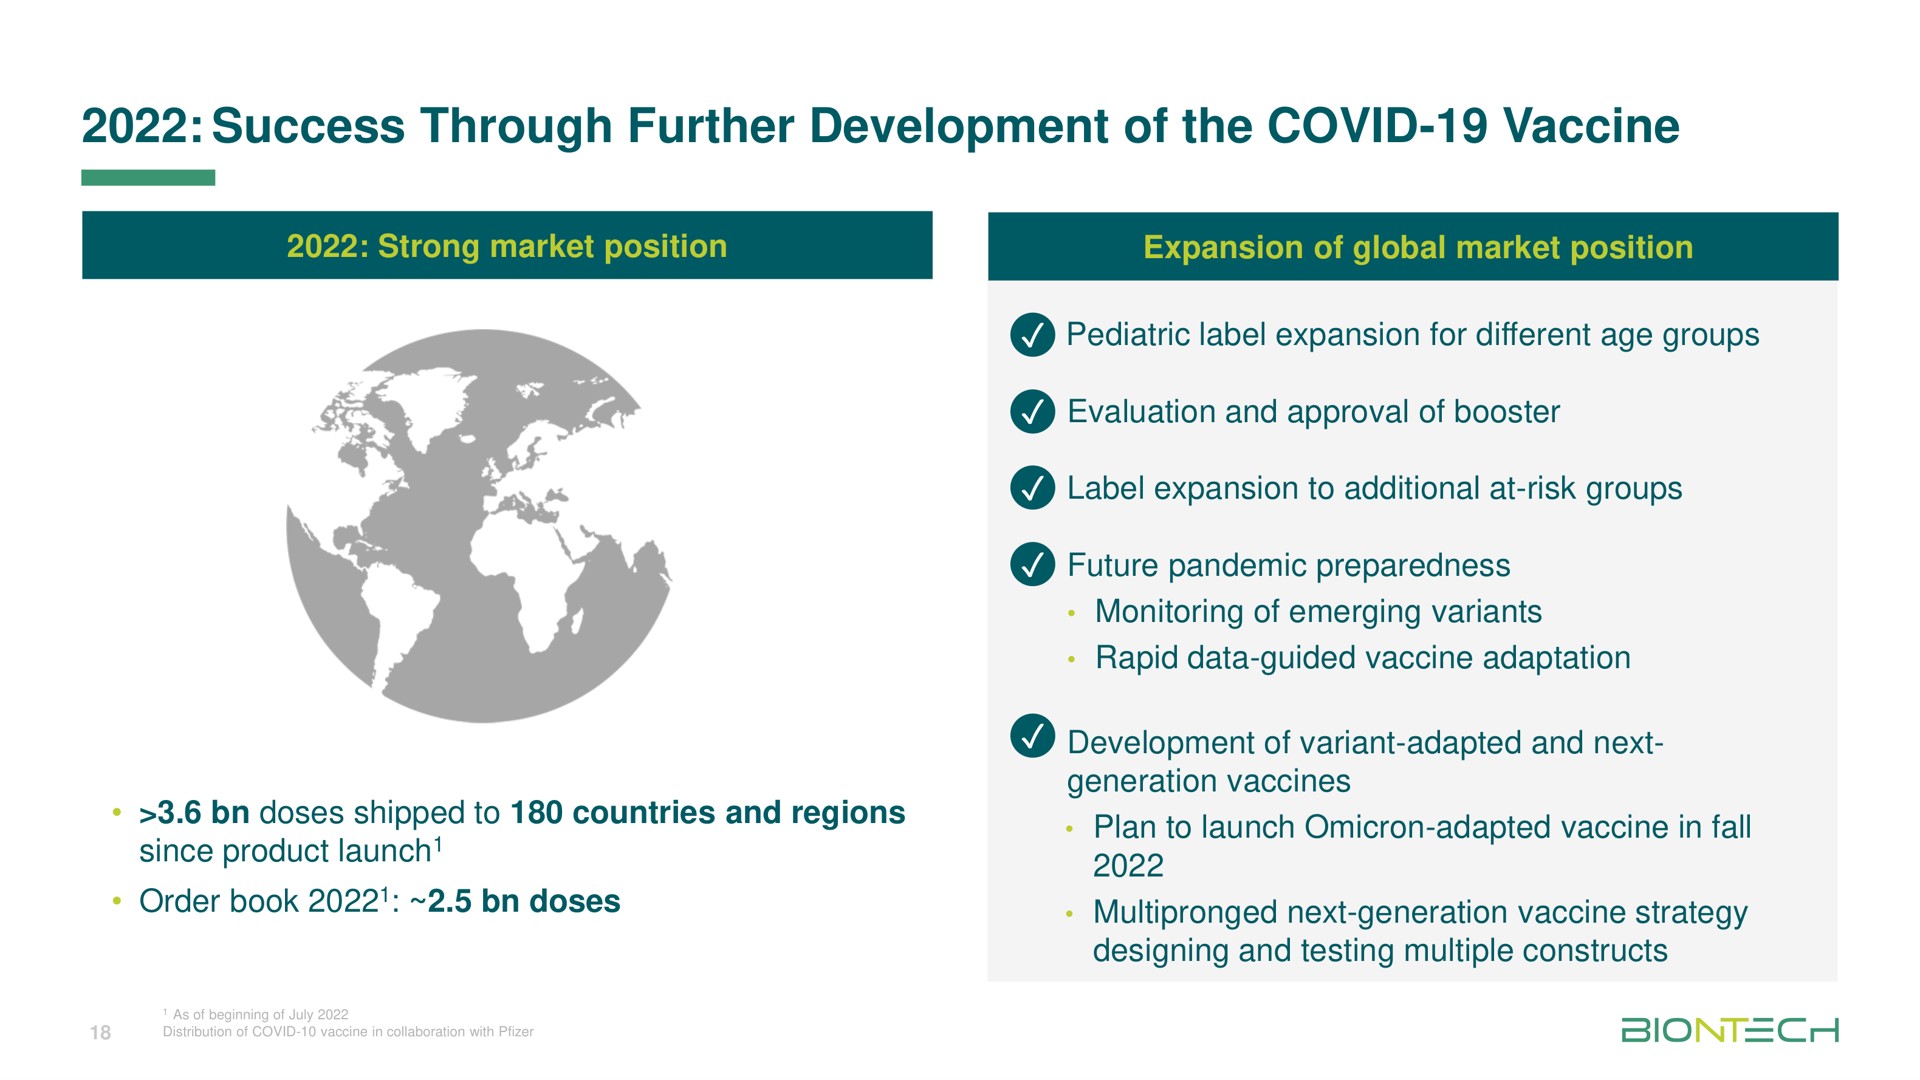 success through further development of the covid vaccine pediatric label expansion for different age groups label expansion to additional at risk groups future pandemic preparedness order book doses next generation strategy | BioNTech